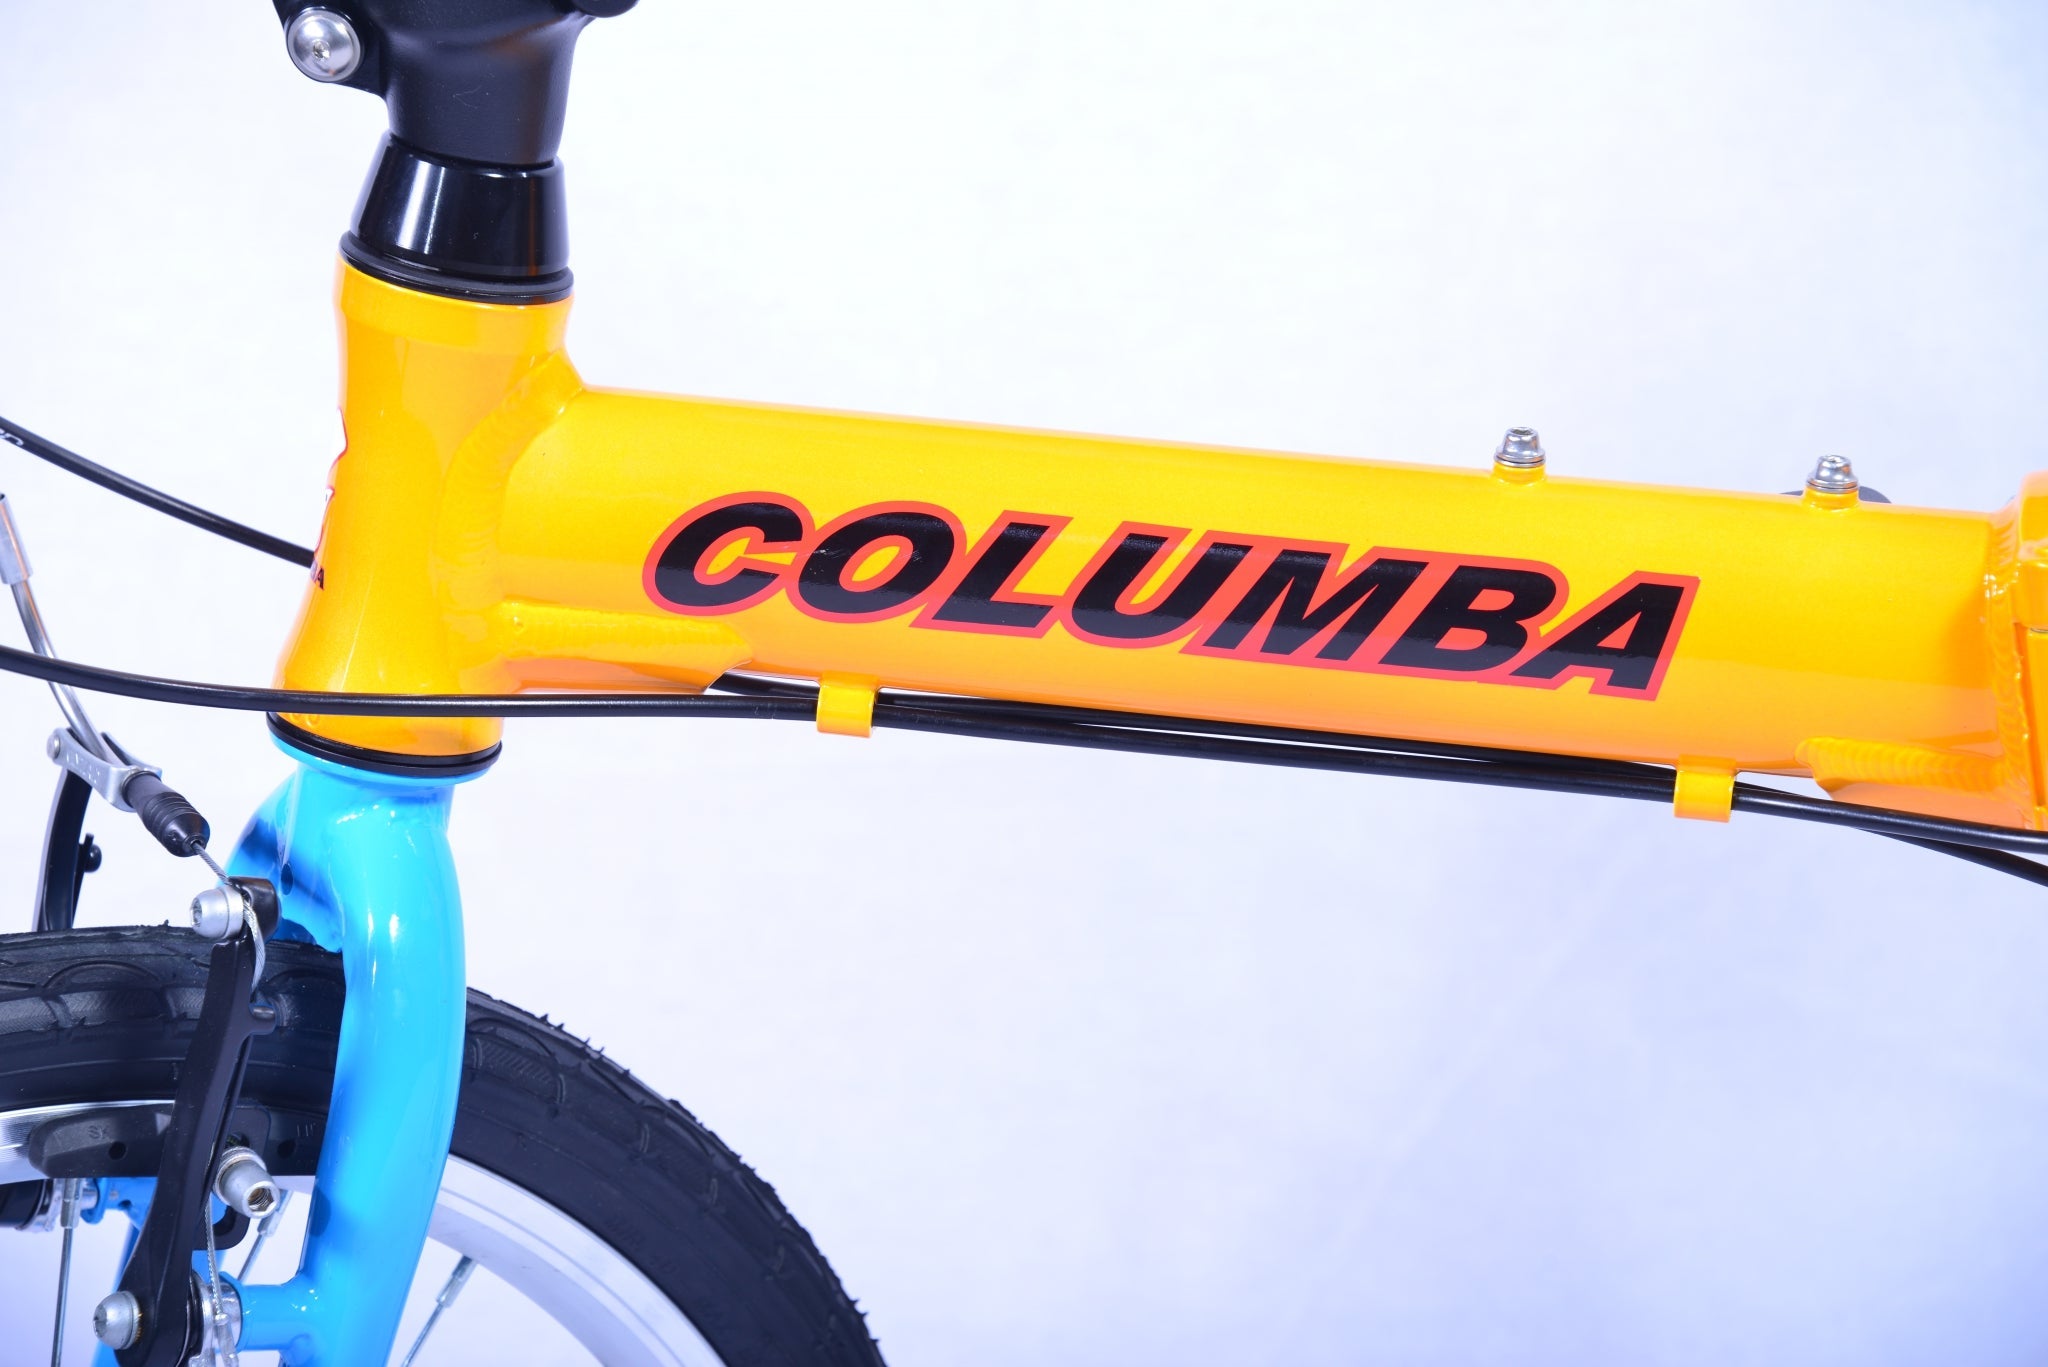 Tube of an orange and blue folding bicycle with a logo titled "Columba."